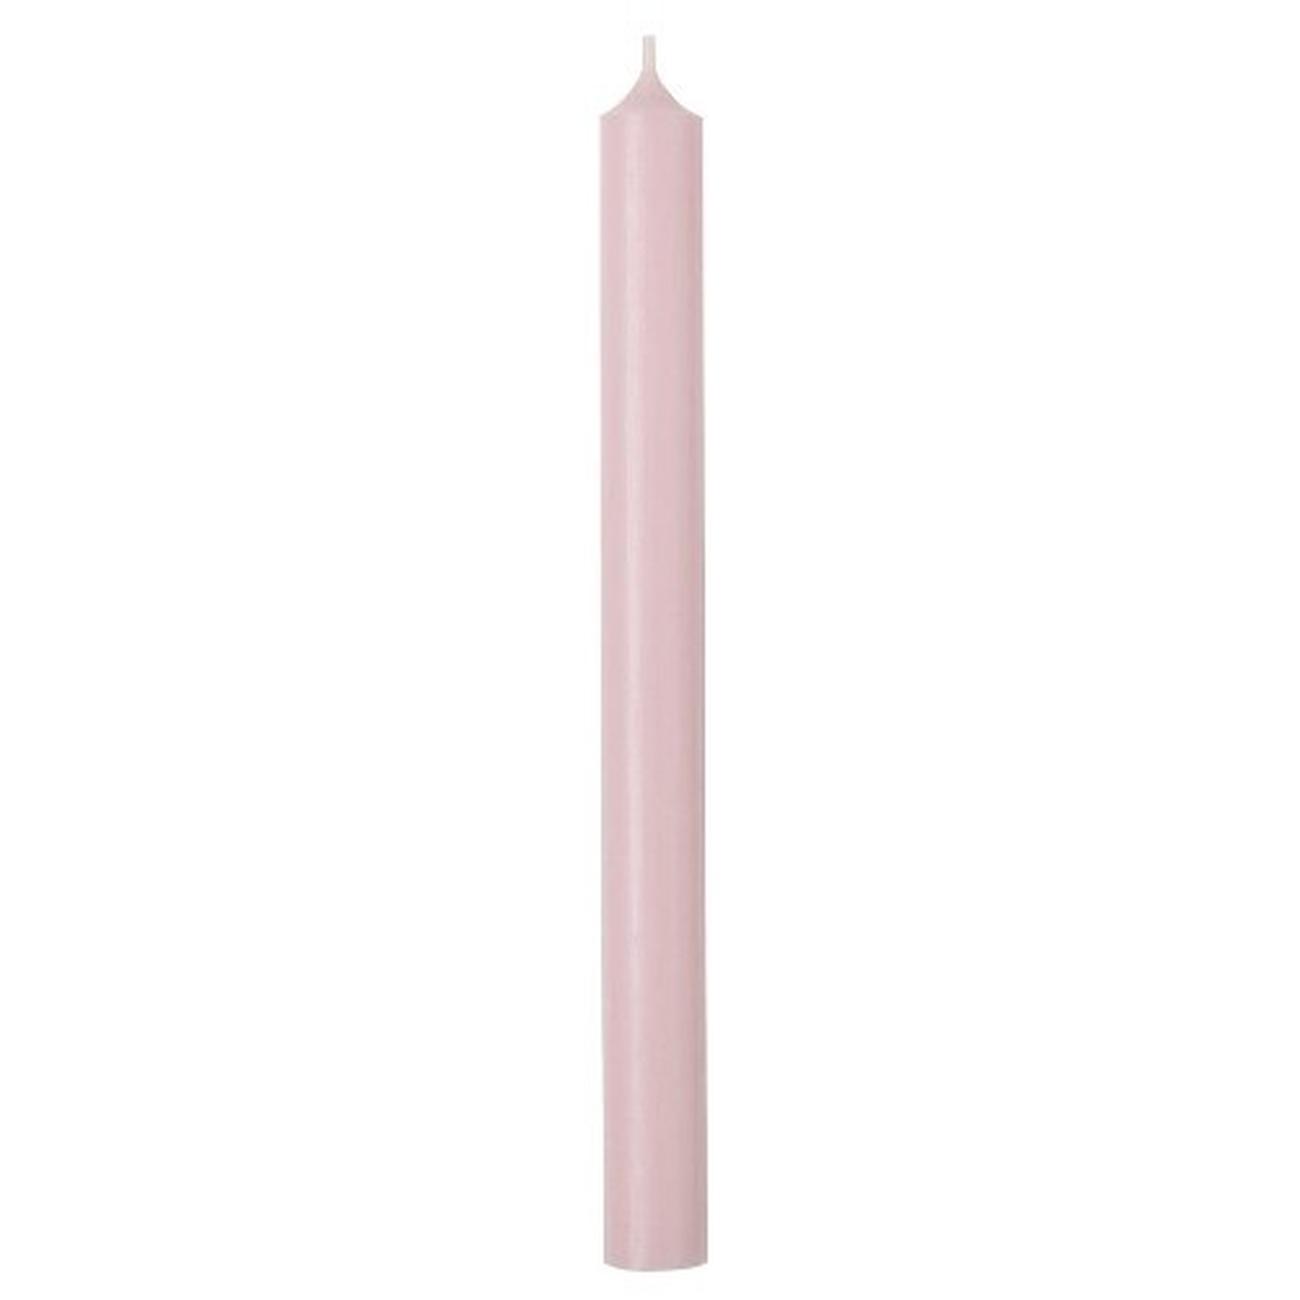 ihr-cylinder-candle-orchid-pink - IHR Cylinder Candle Orchid Pink